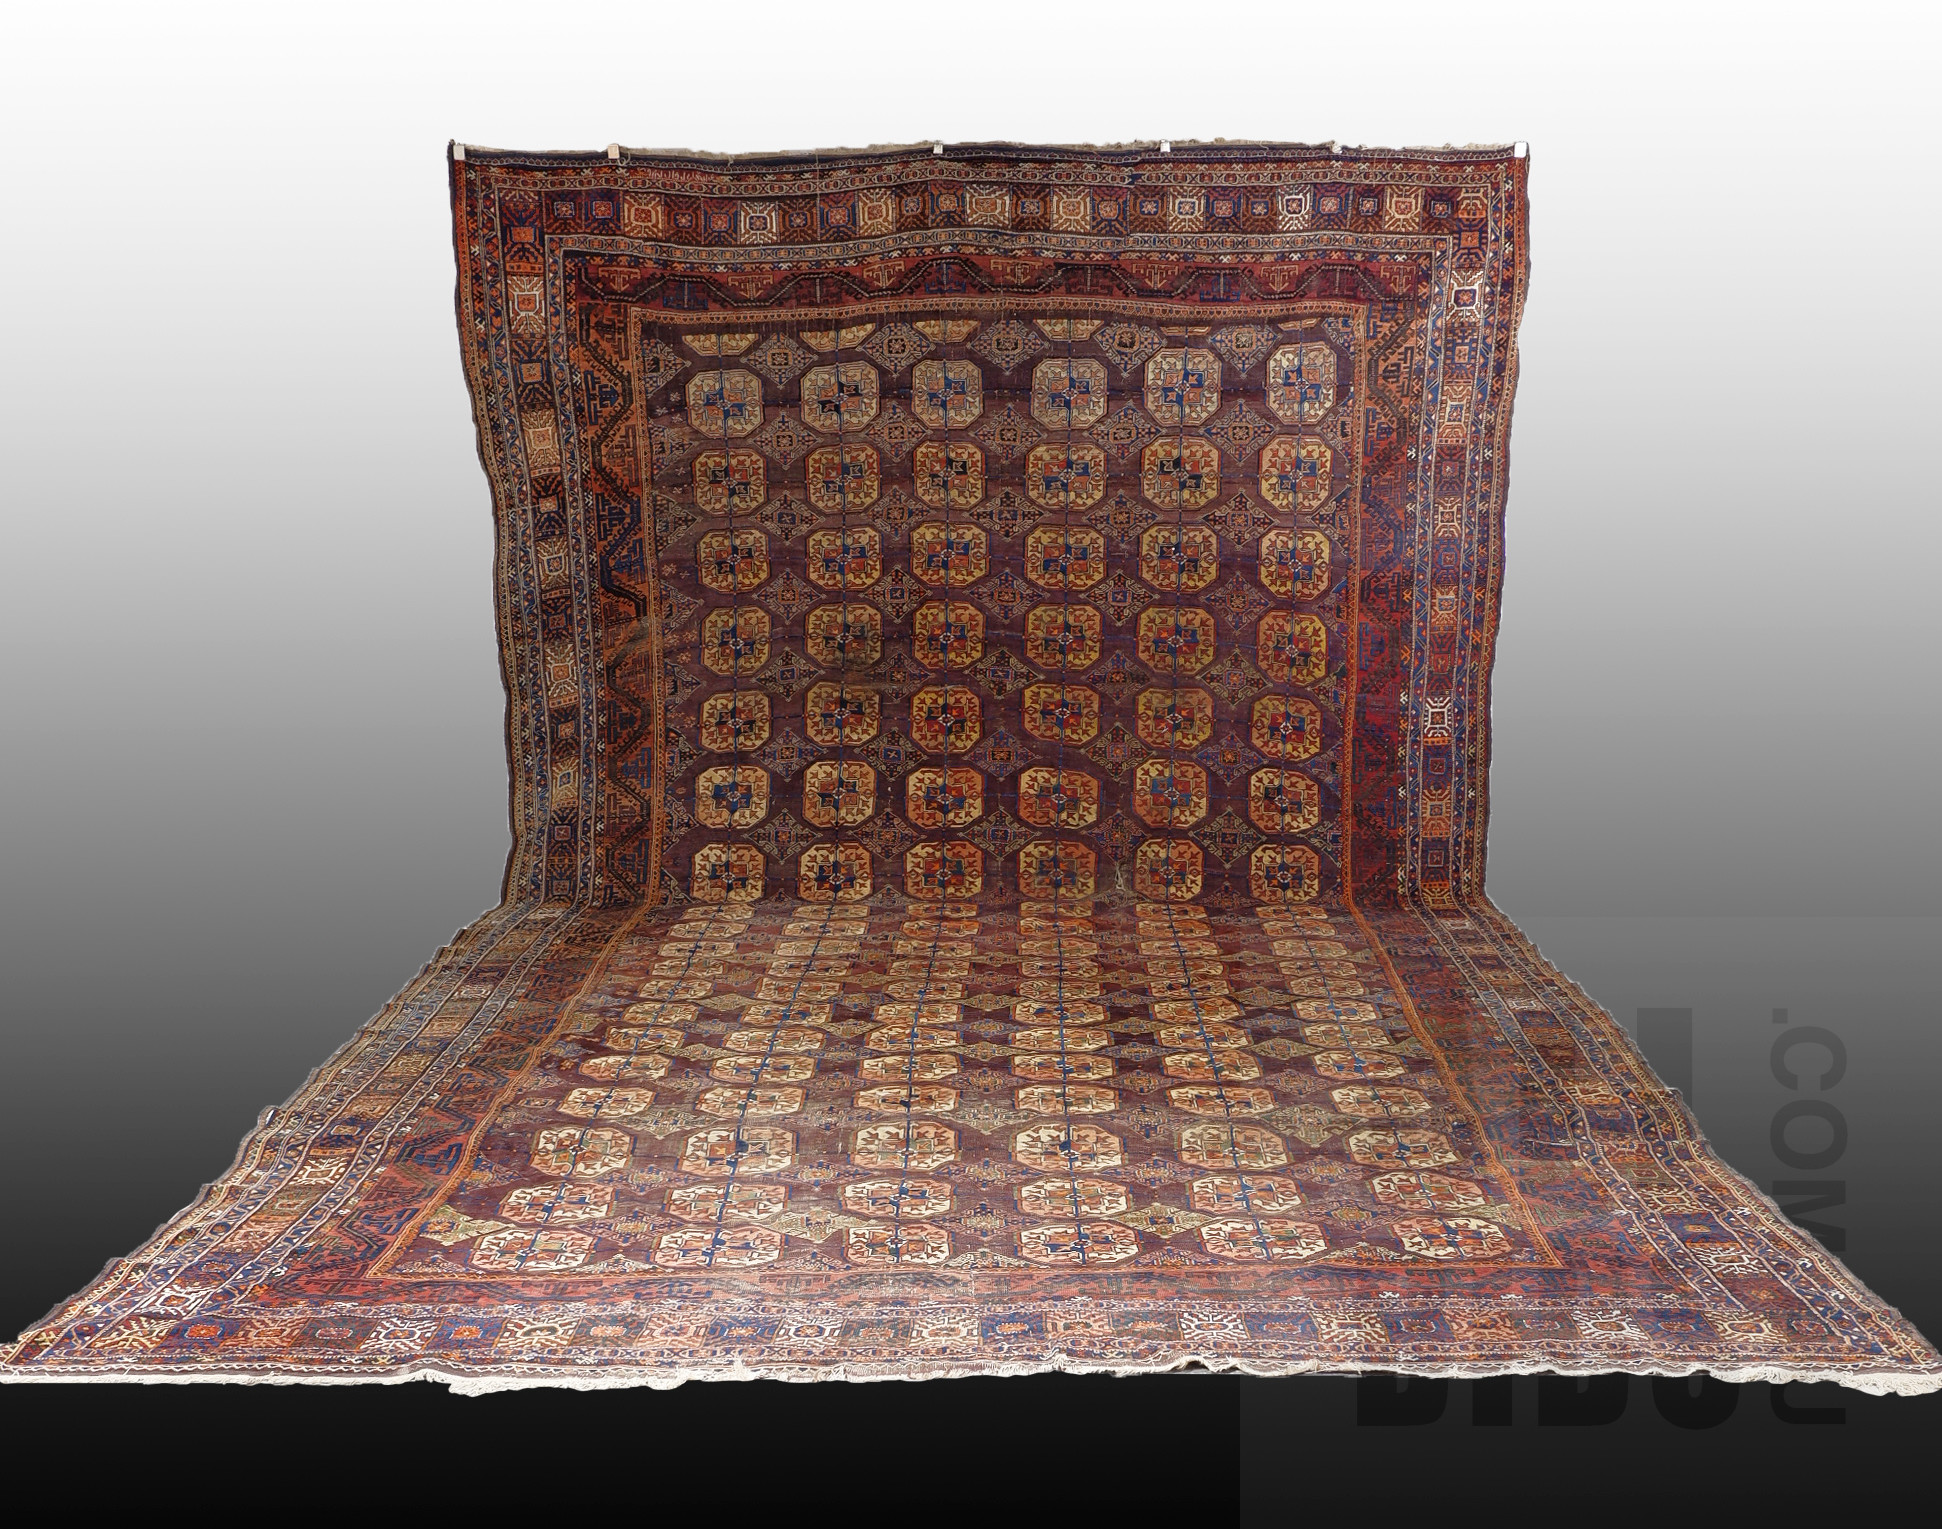 'Immense Important Inscribed Antique Tribal Turkmen Hand Knotted Wool Pile Tekke Gul Main Carpet, 19th Century'